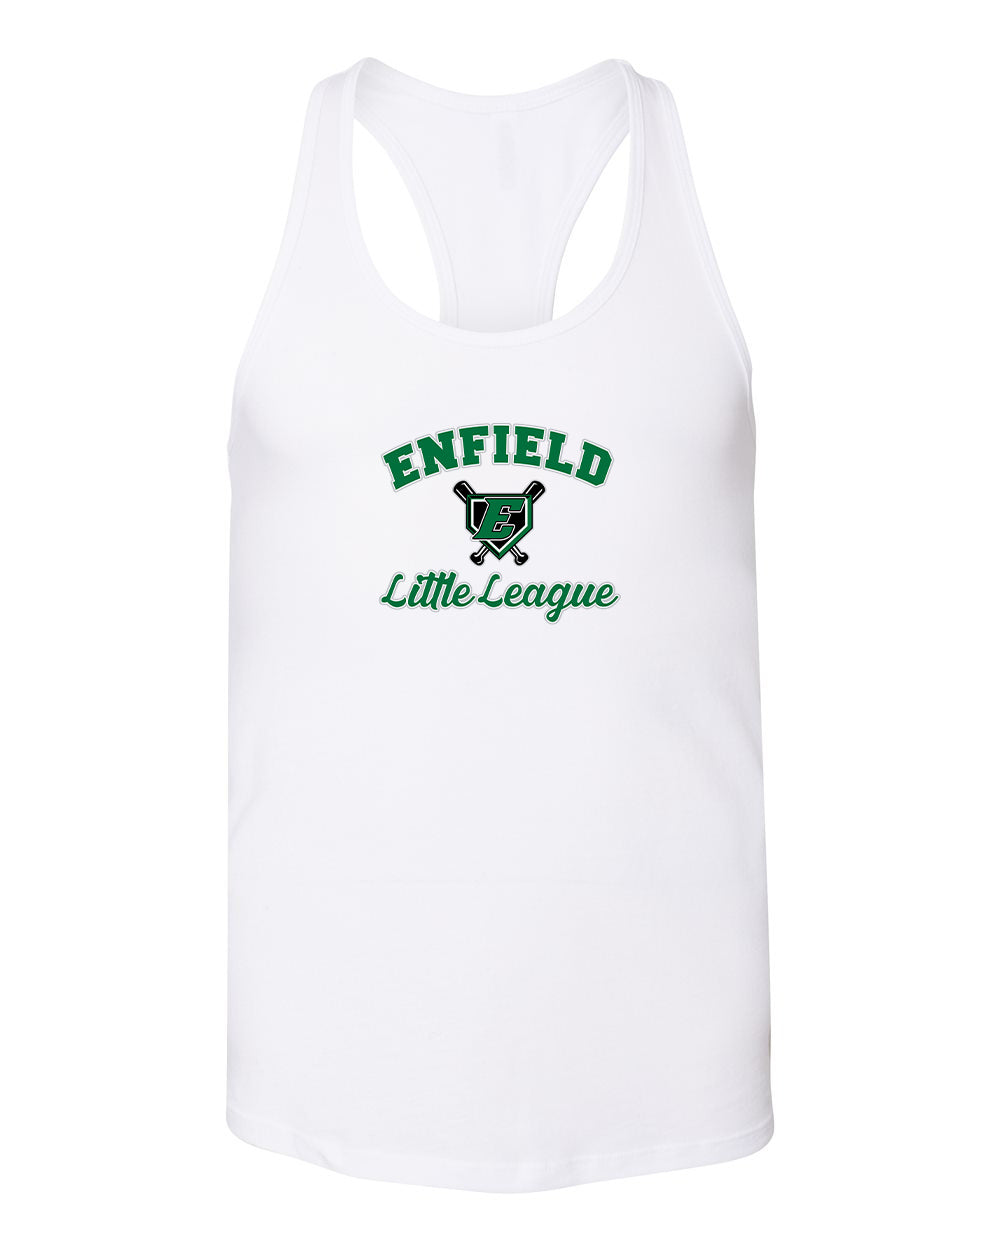 ELL Ladies Tank Top "CC" - 6008 (color options available)